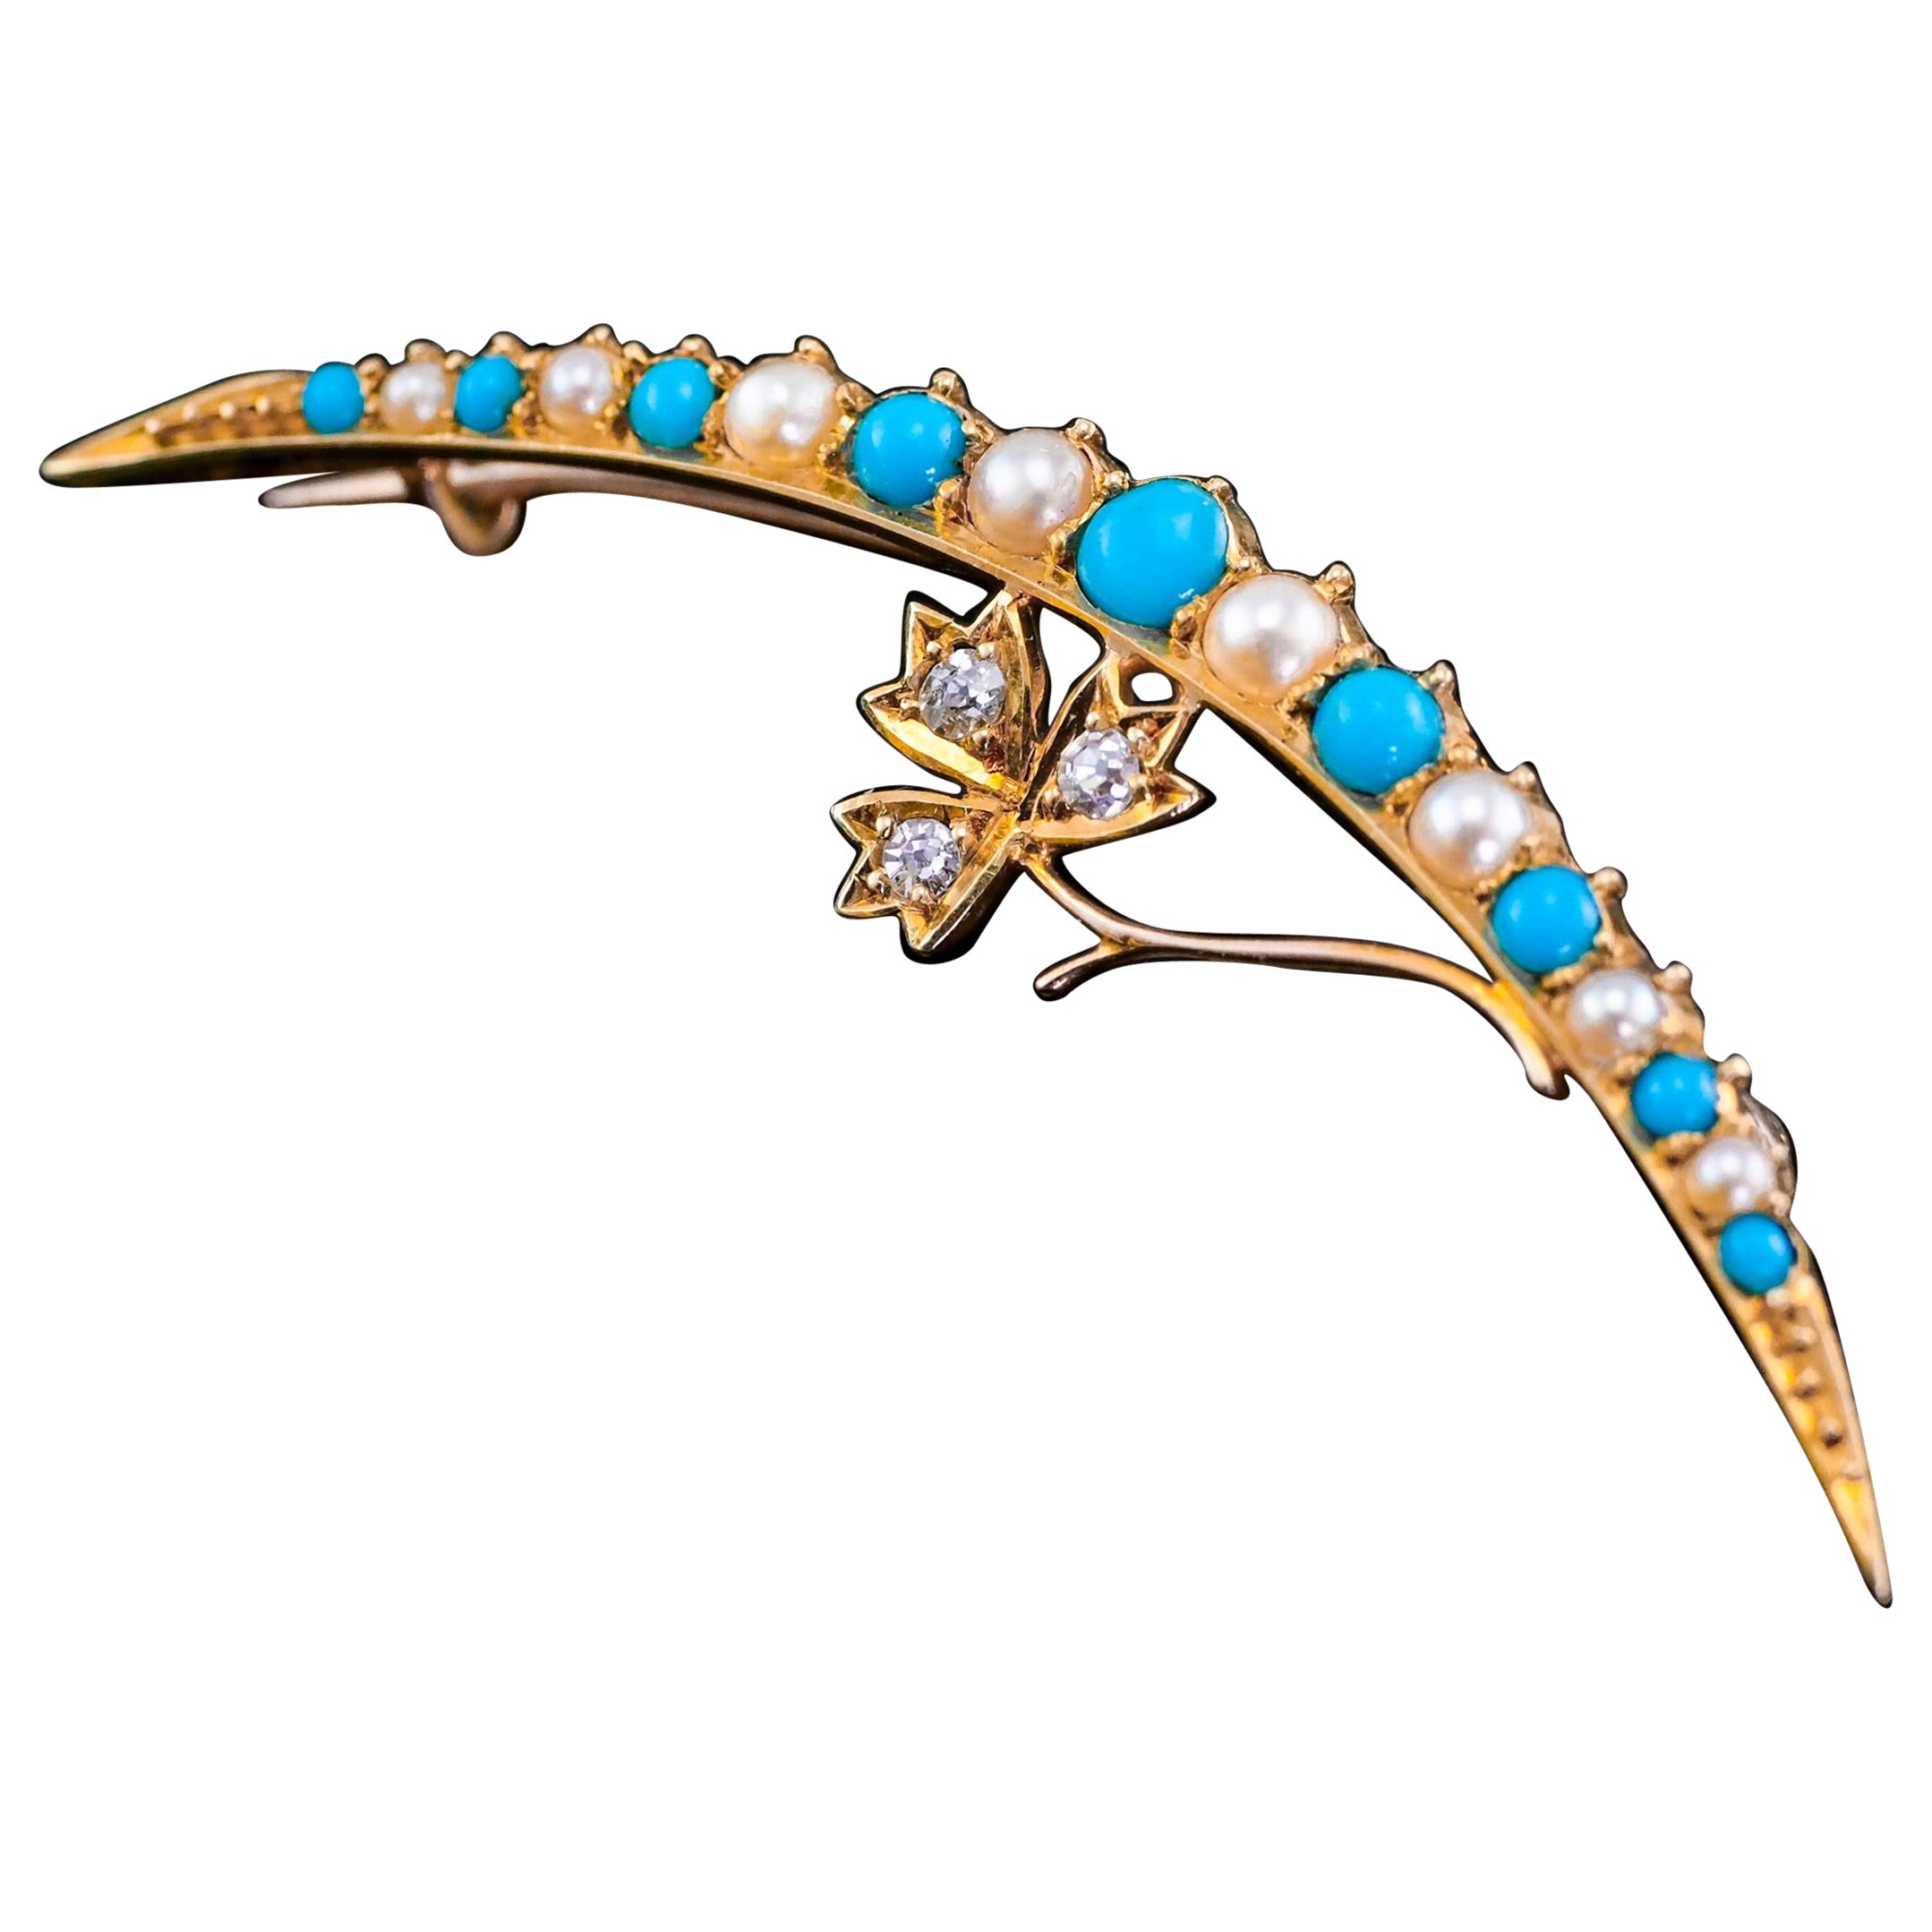 Antique Victorian 15k Gold Turquoise, Pearl & Diamond Crescent Brooch, c.1900 For Sale